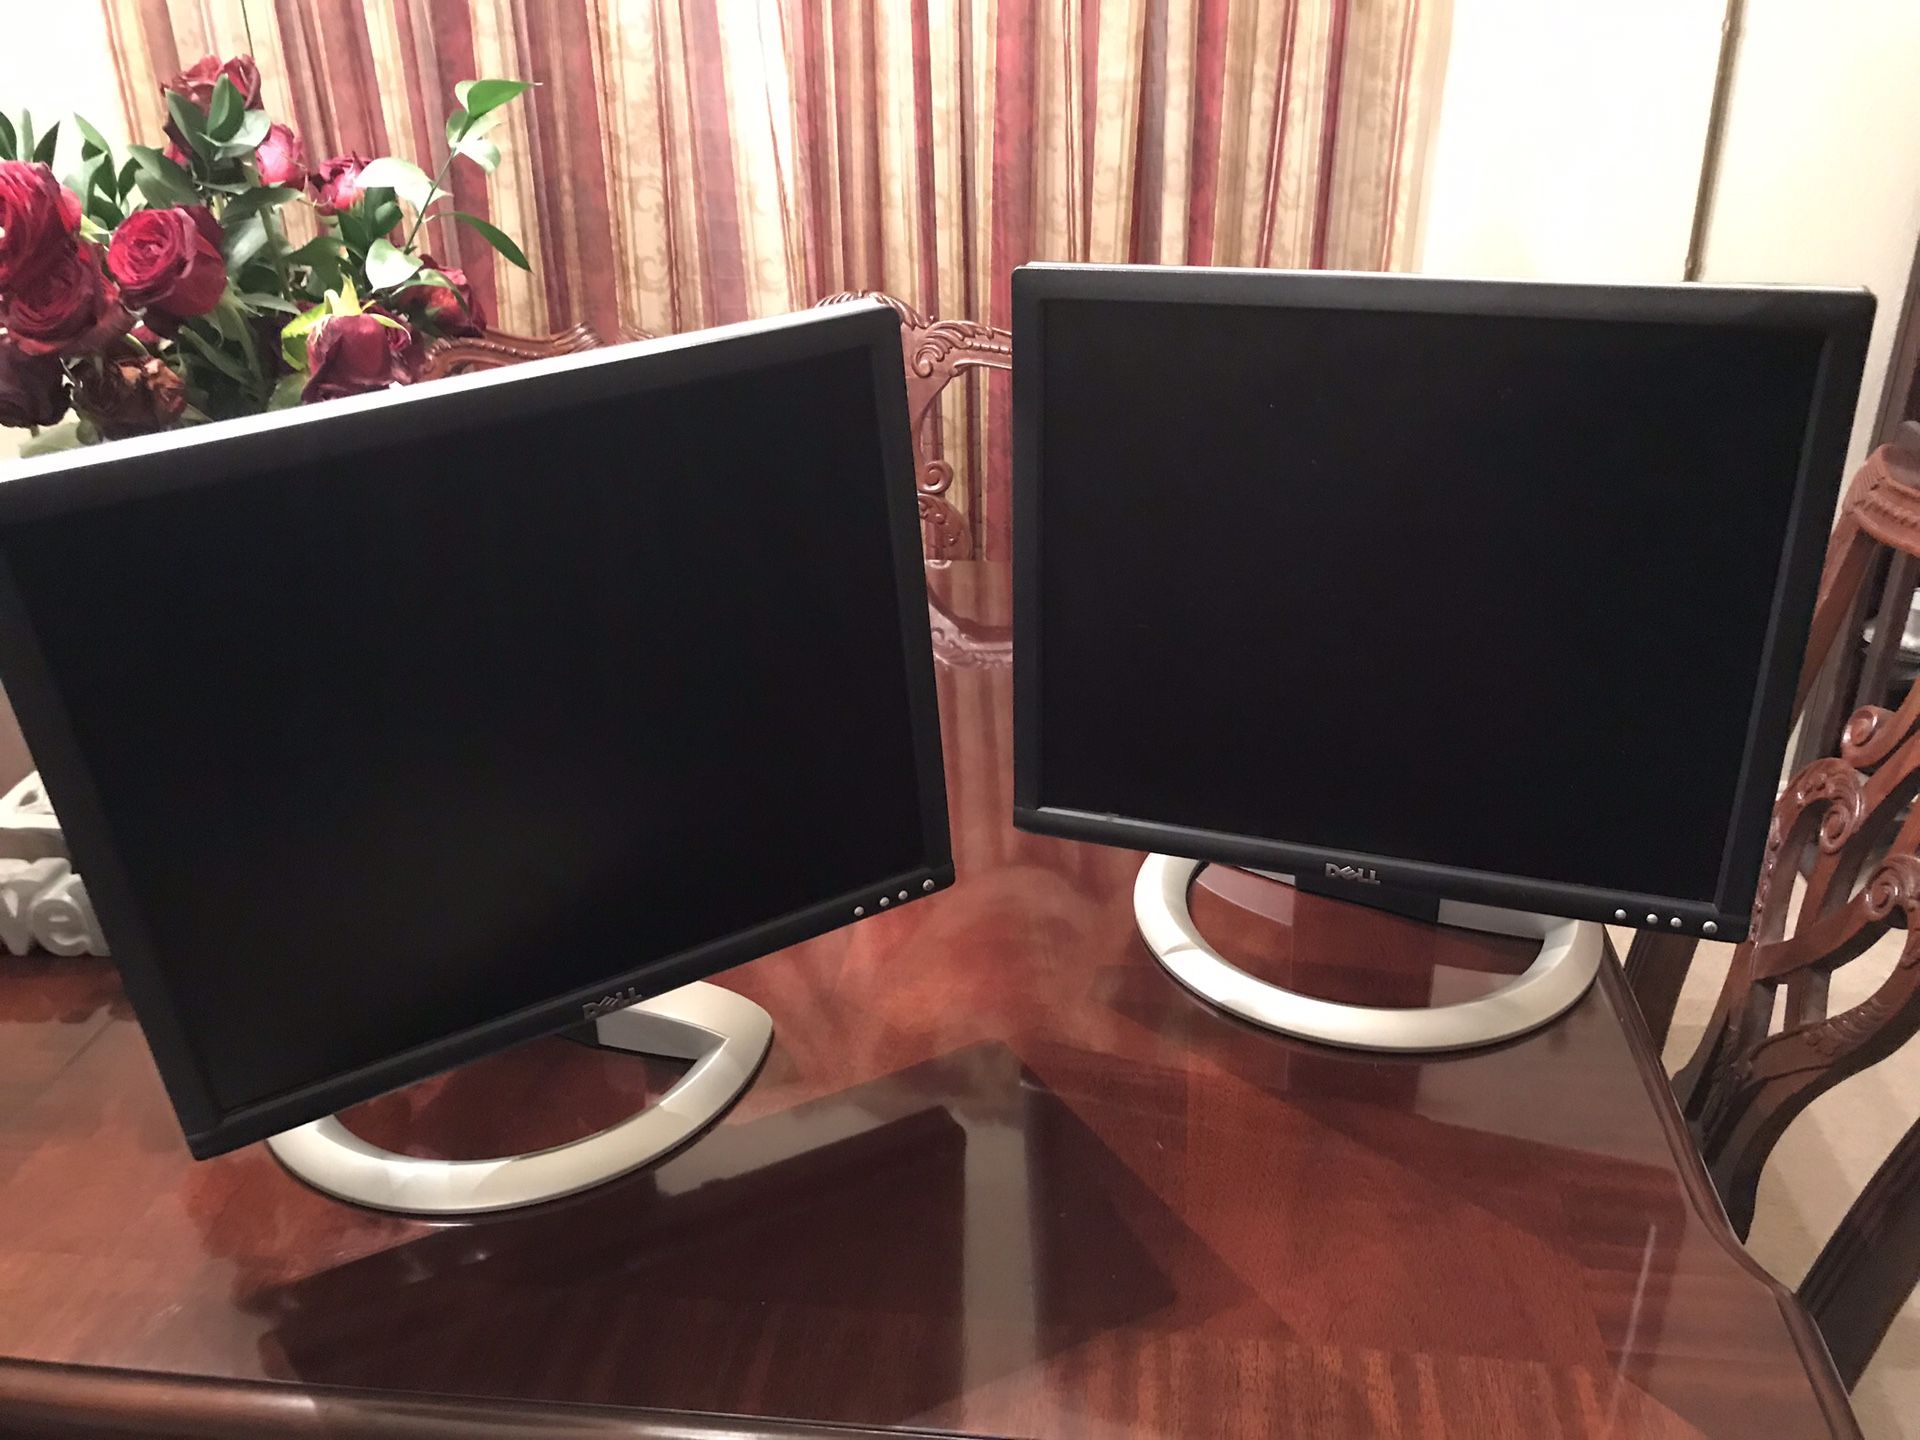 Dell 22” LED Color Monitors Used As Dual Monitors $15 Each or Best Offer